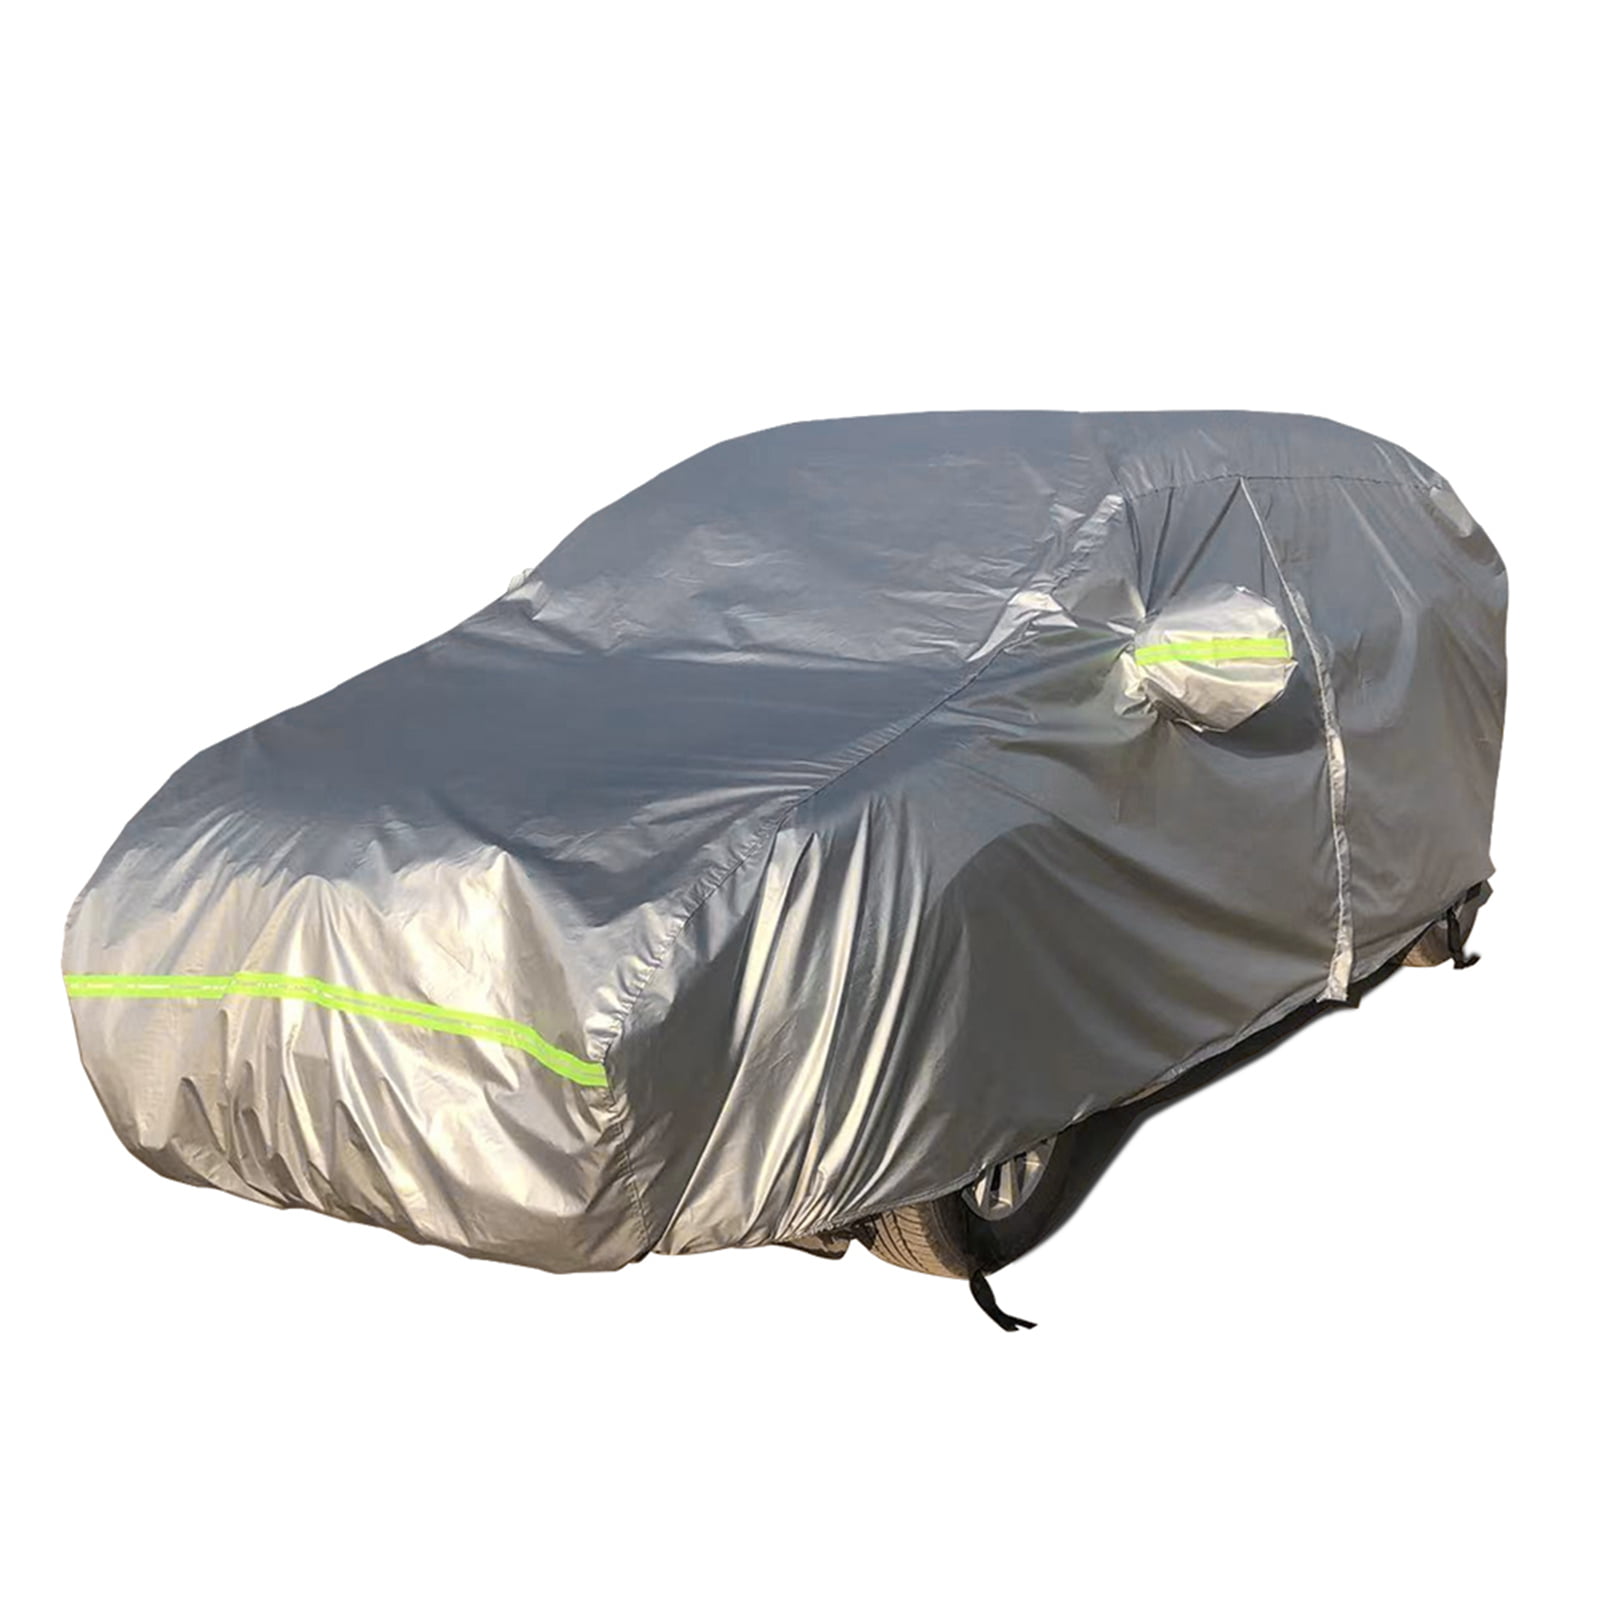 Land Rover LR4 5 Layer SUV Car Cover Outdoor Water Proof Rain Sun Dust New Gen 